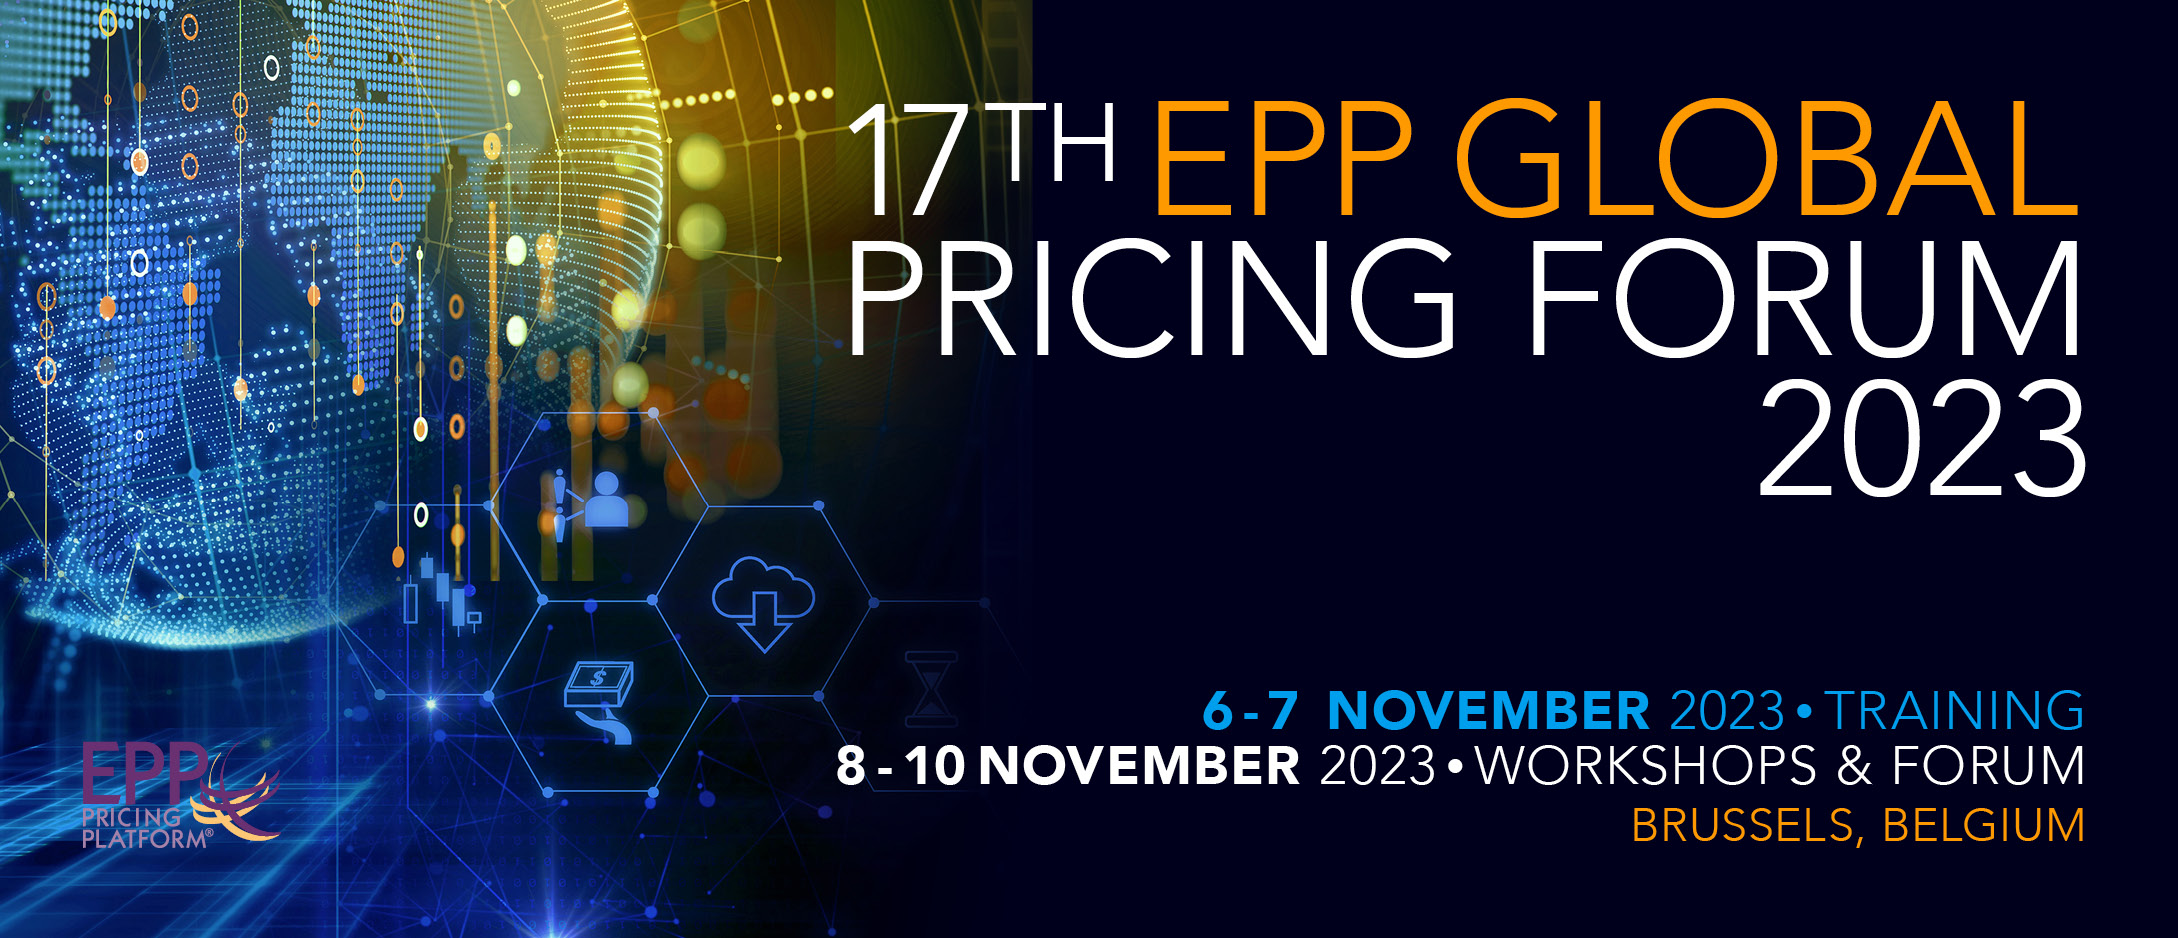 17th EPP Global Pricing Forum 2023